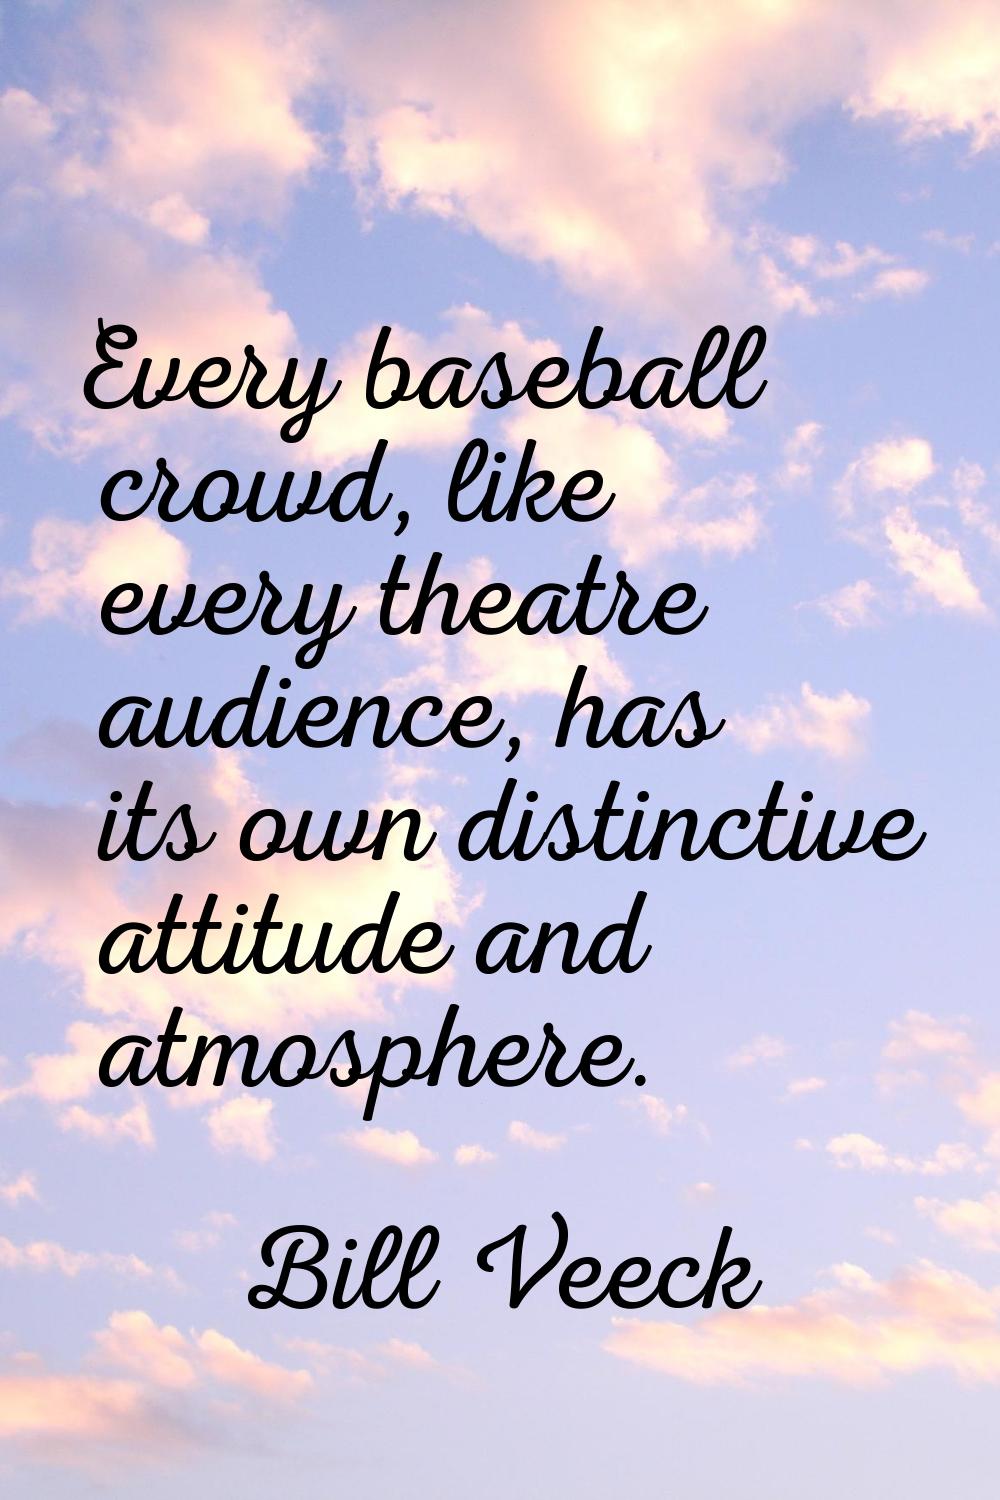 Every baseball crowd, like every theatre audience, has its own distinctive attitude and atmosphere.